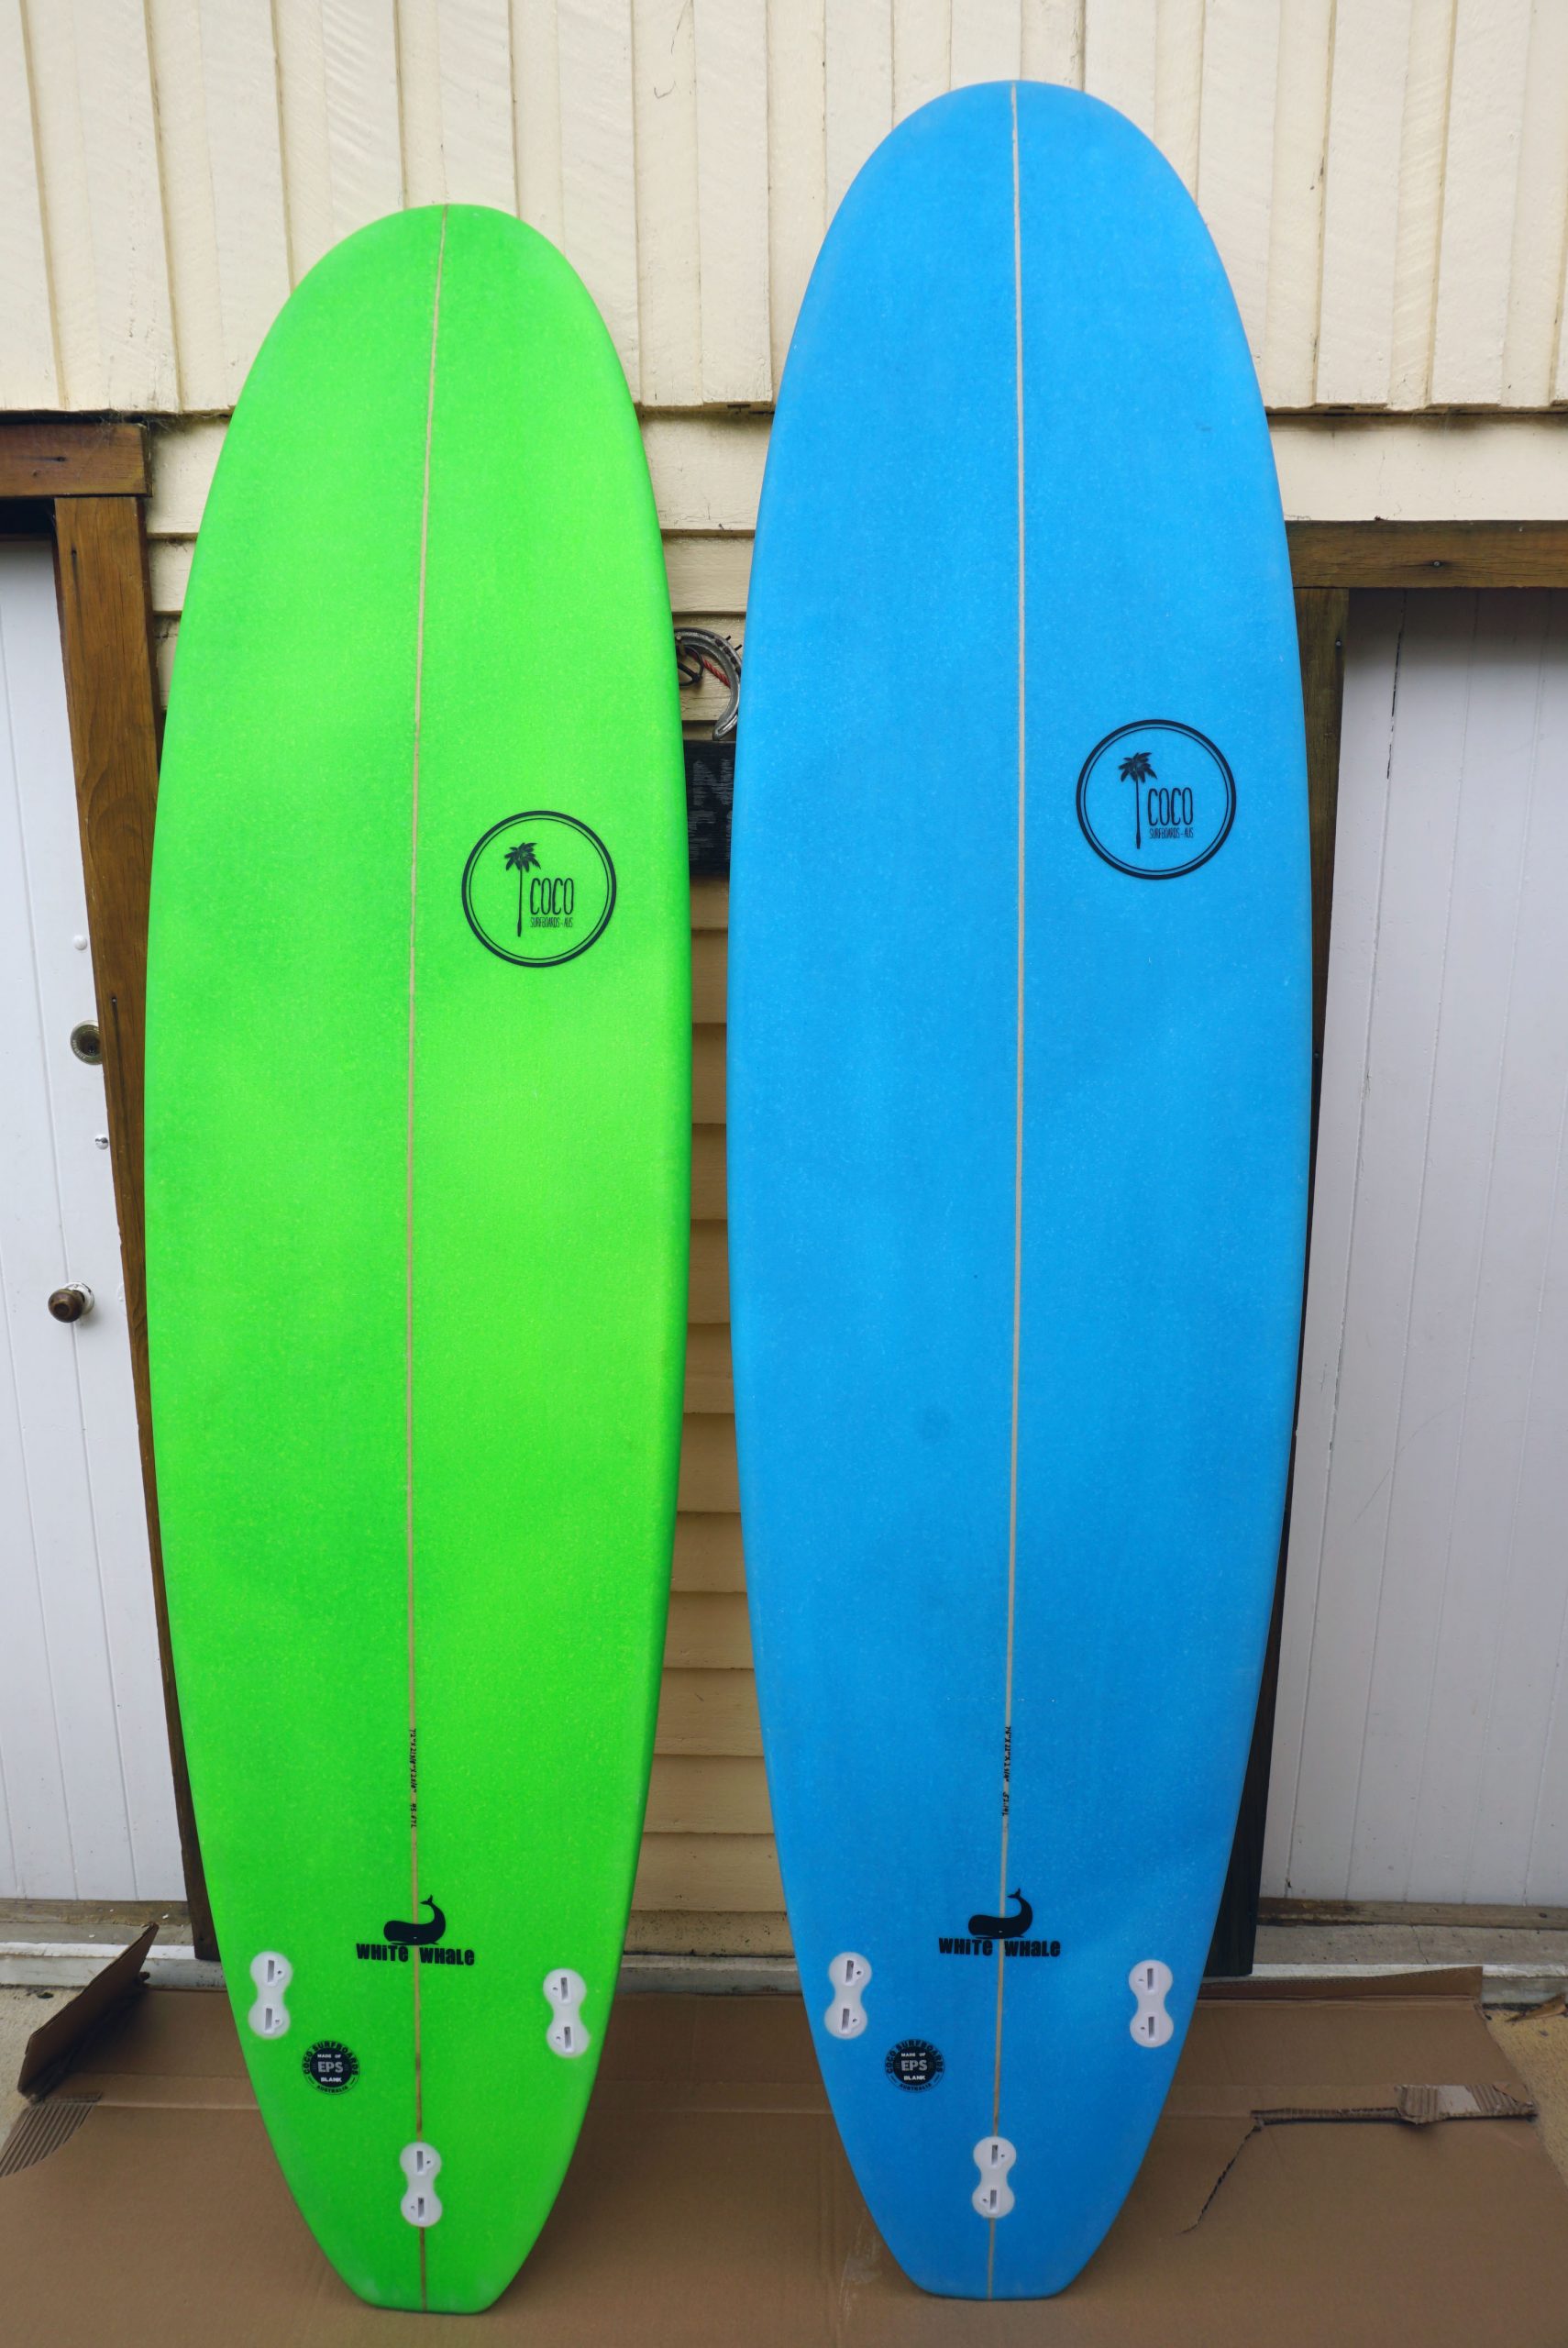 coco surfboards in various sizes at jay sails 